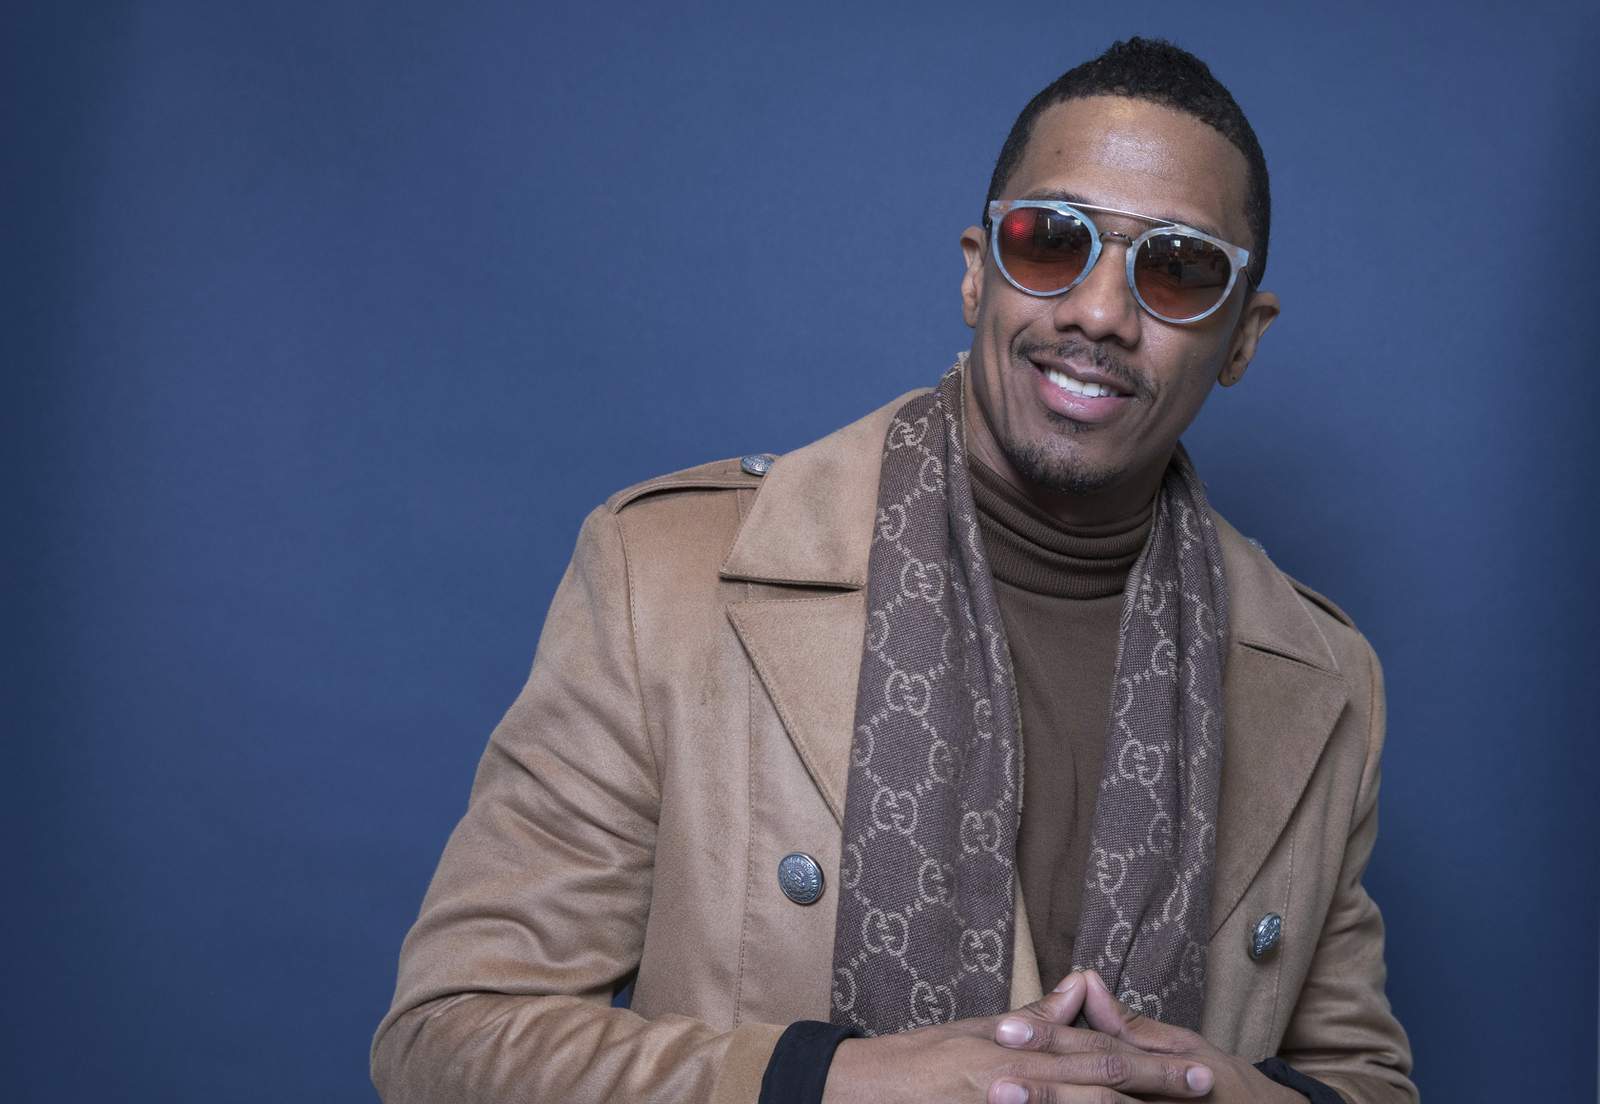 Nick Cannon apologizes to Jewish community for hurtful words